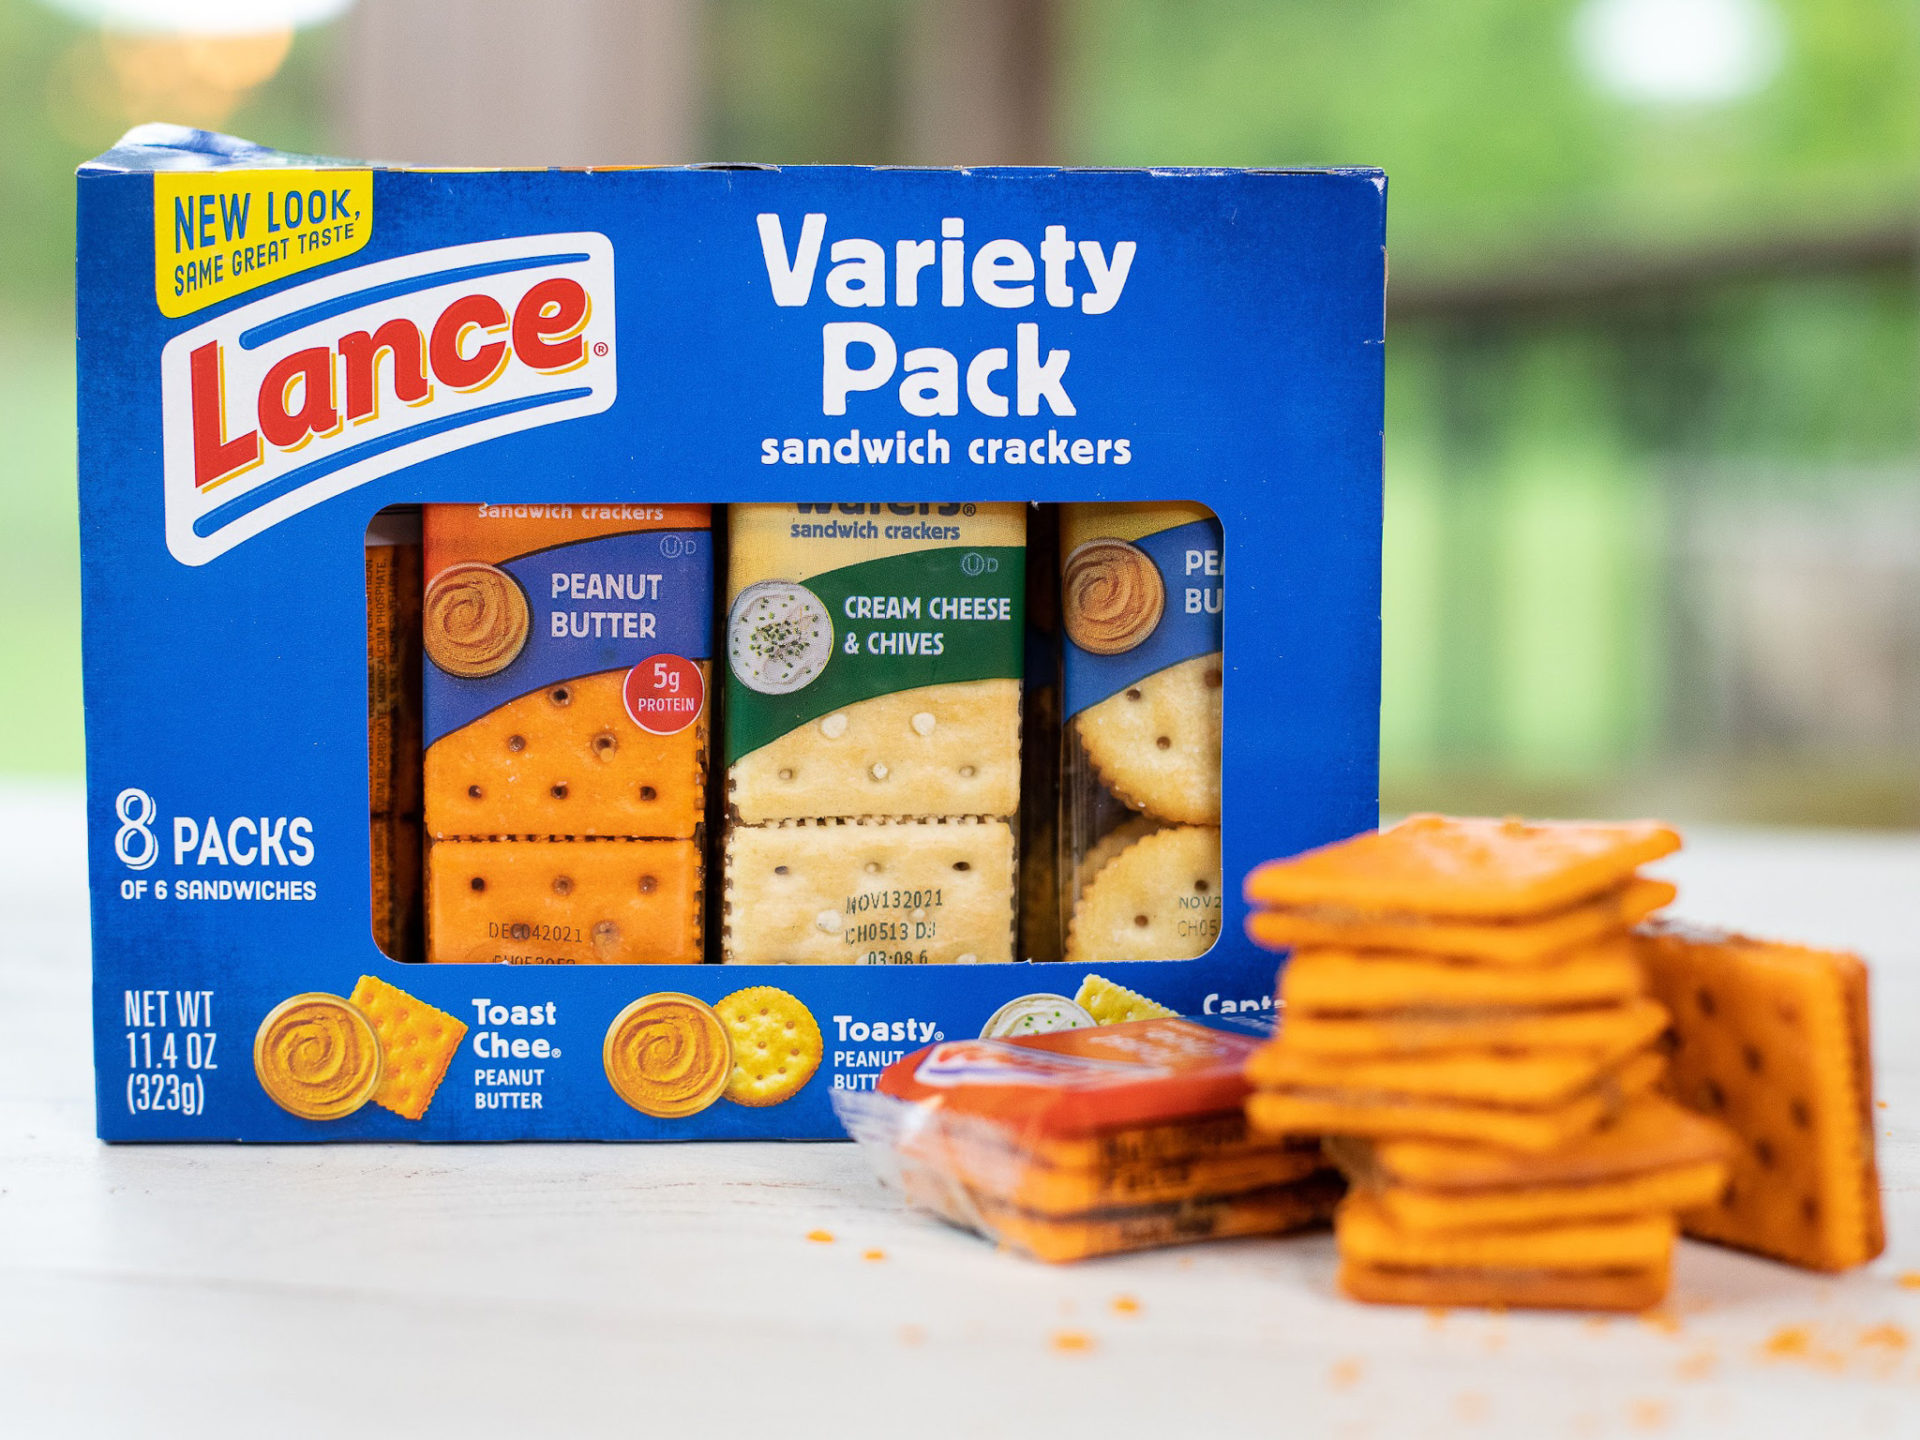 Lance Sandwich Crackers Are Just $2.99 At Kroger (Regular Price $4.49)